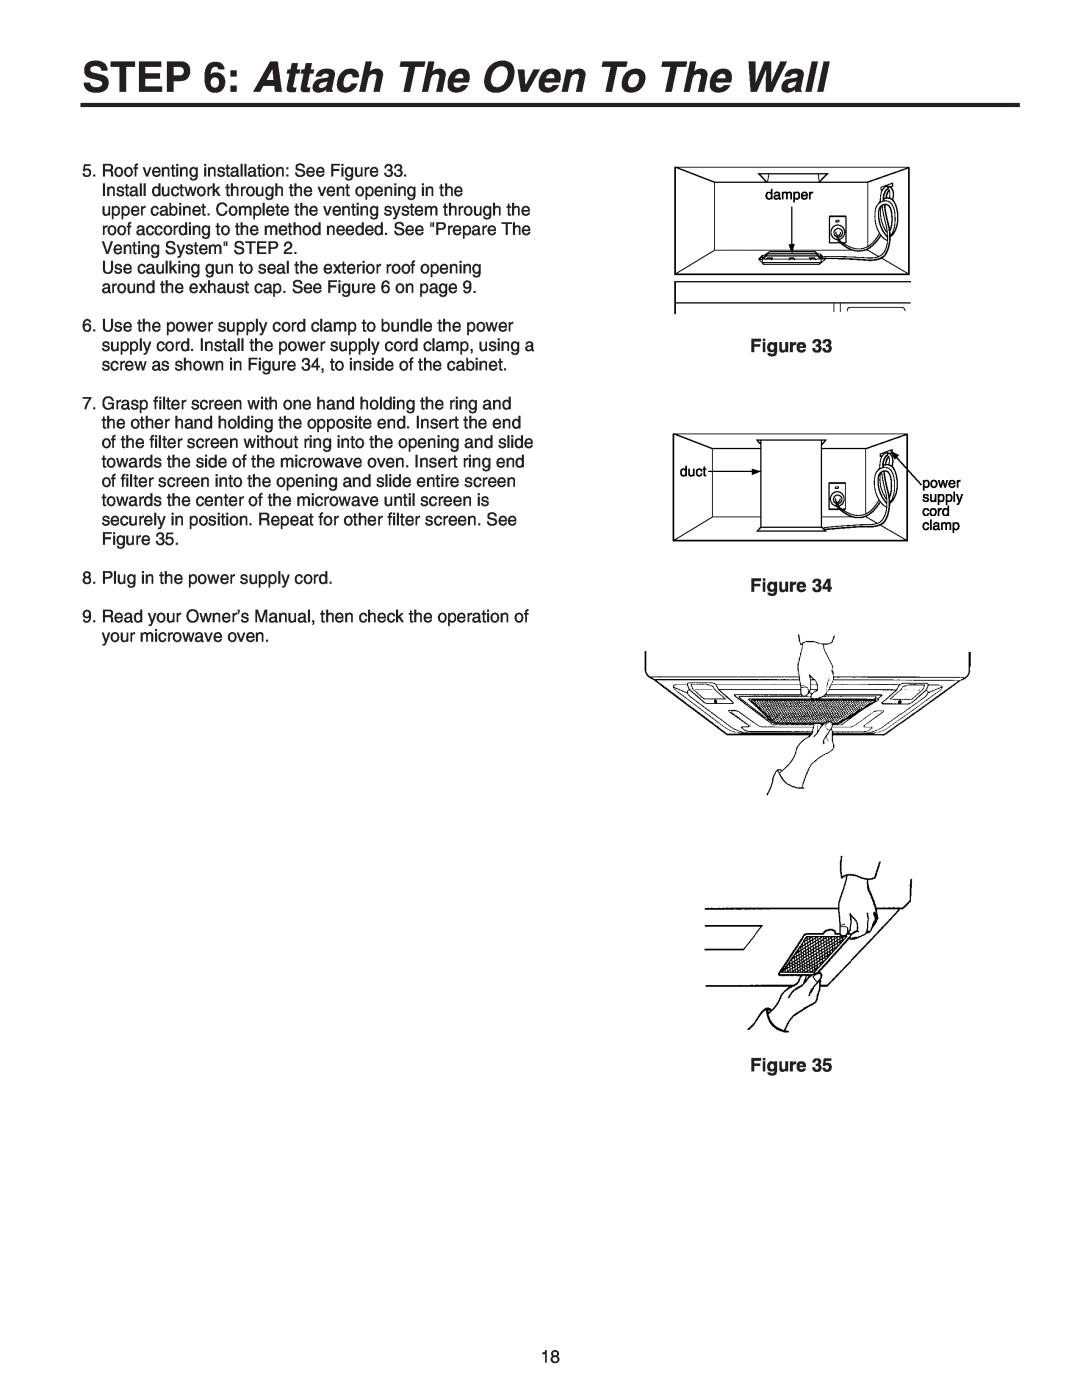 Maytag 8101P641-60 installation instructions Attach The Oven To The Wall, Roof venting installation See Figure 